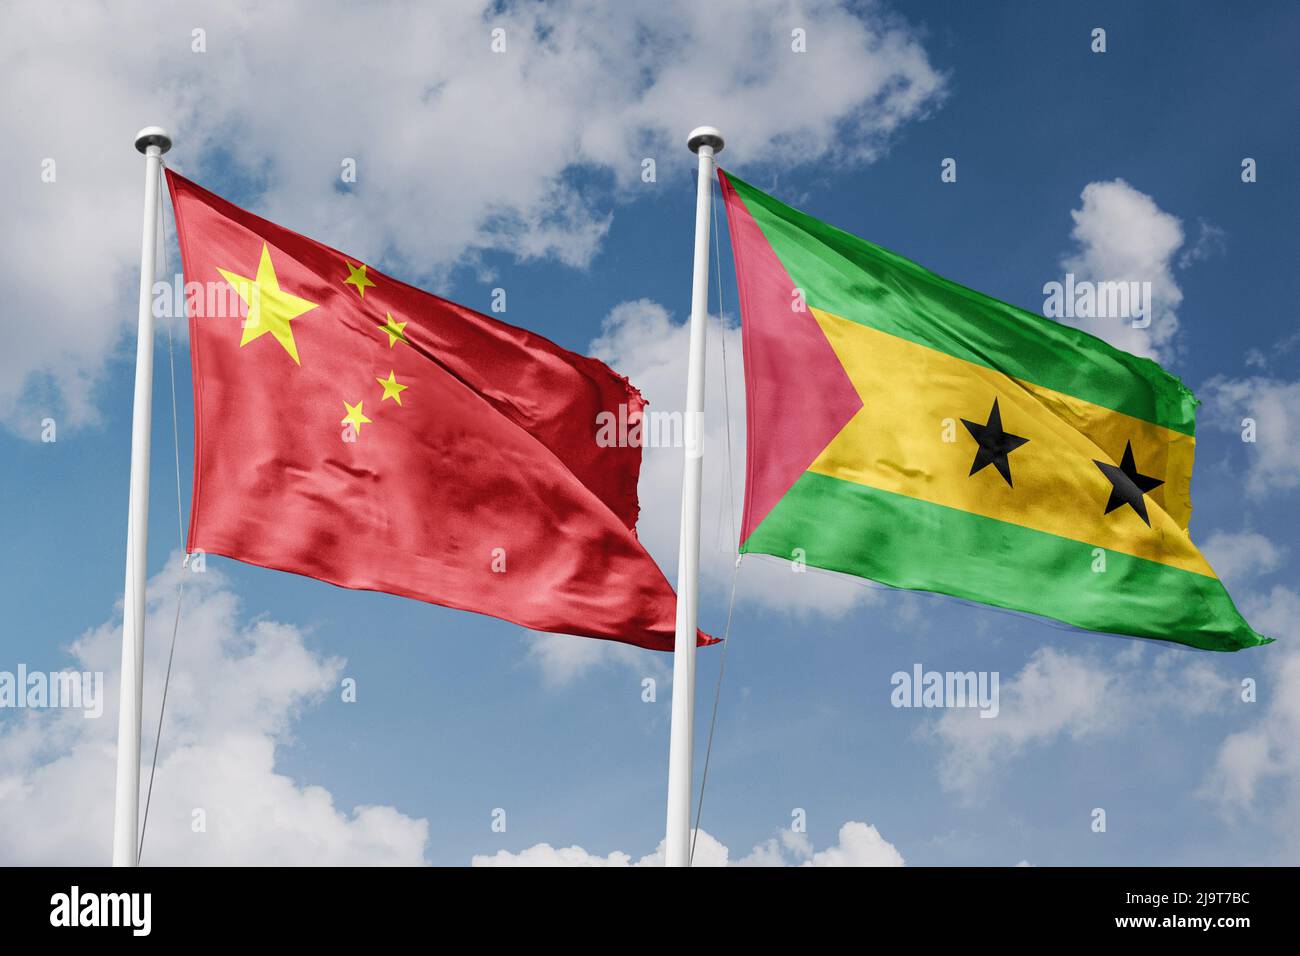 China and Sao Tome and Principe two flags on flagpoles and blue cloudy sky background Stock Photo